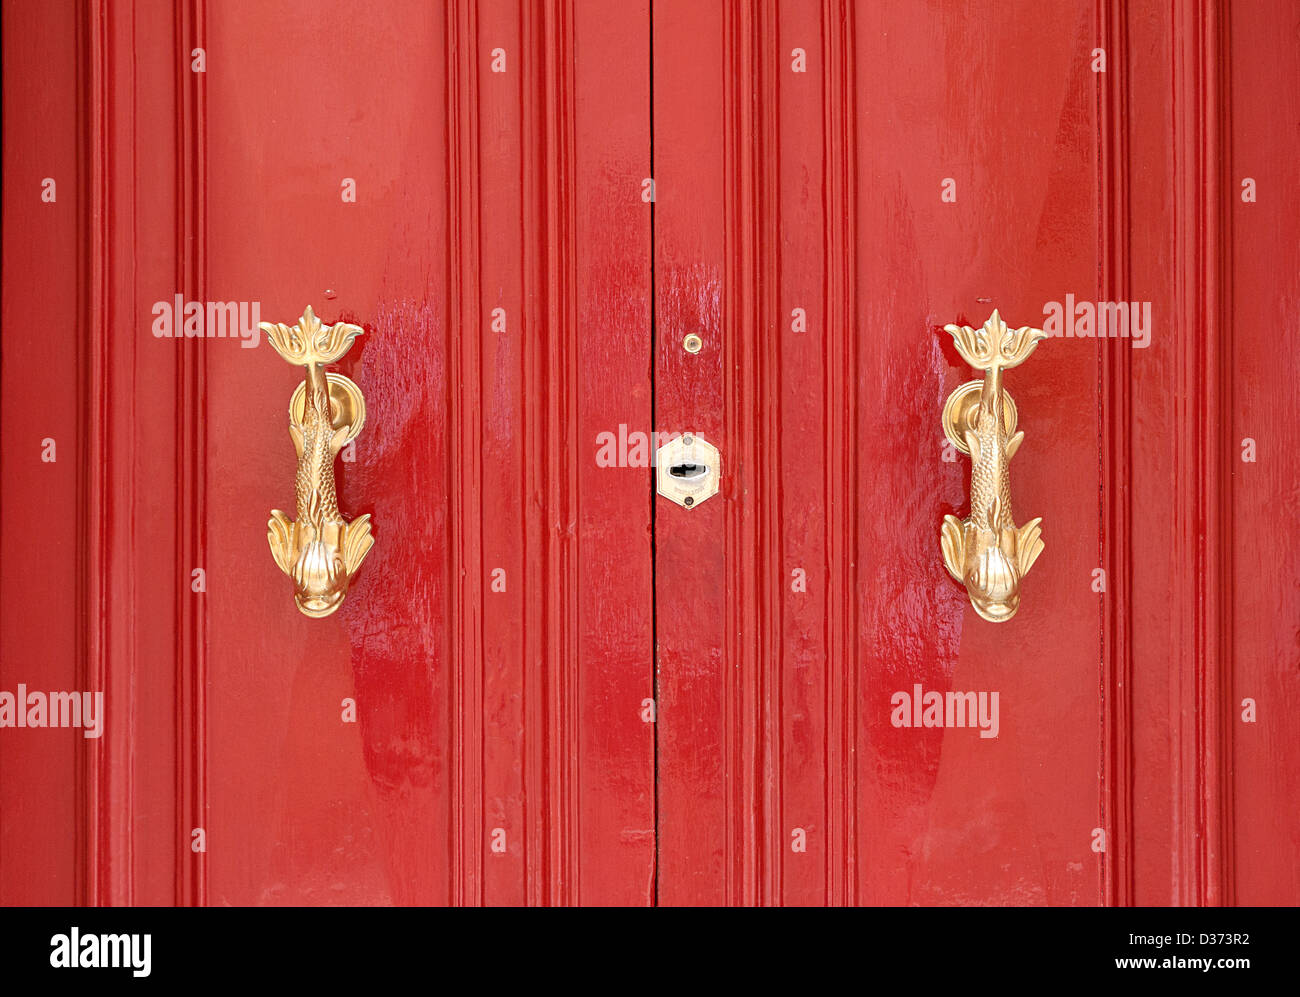 Two brass door knockers in the shape of fish on a bright red door. Stock Photo